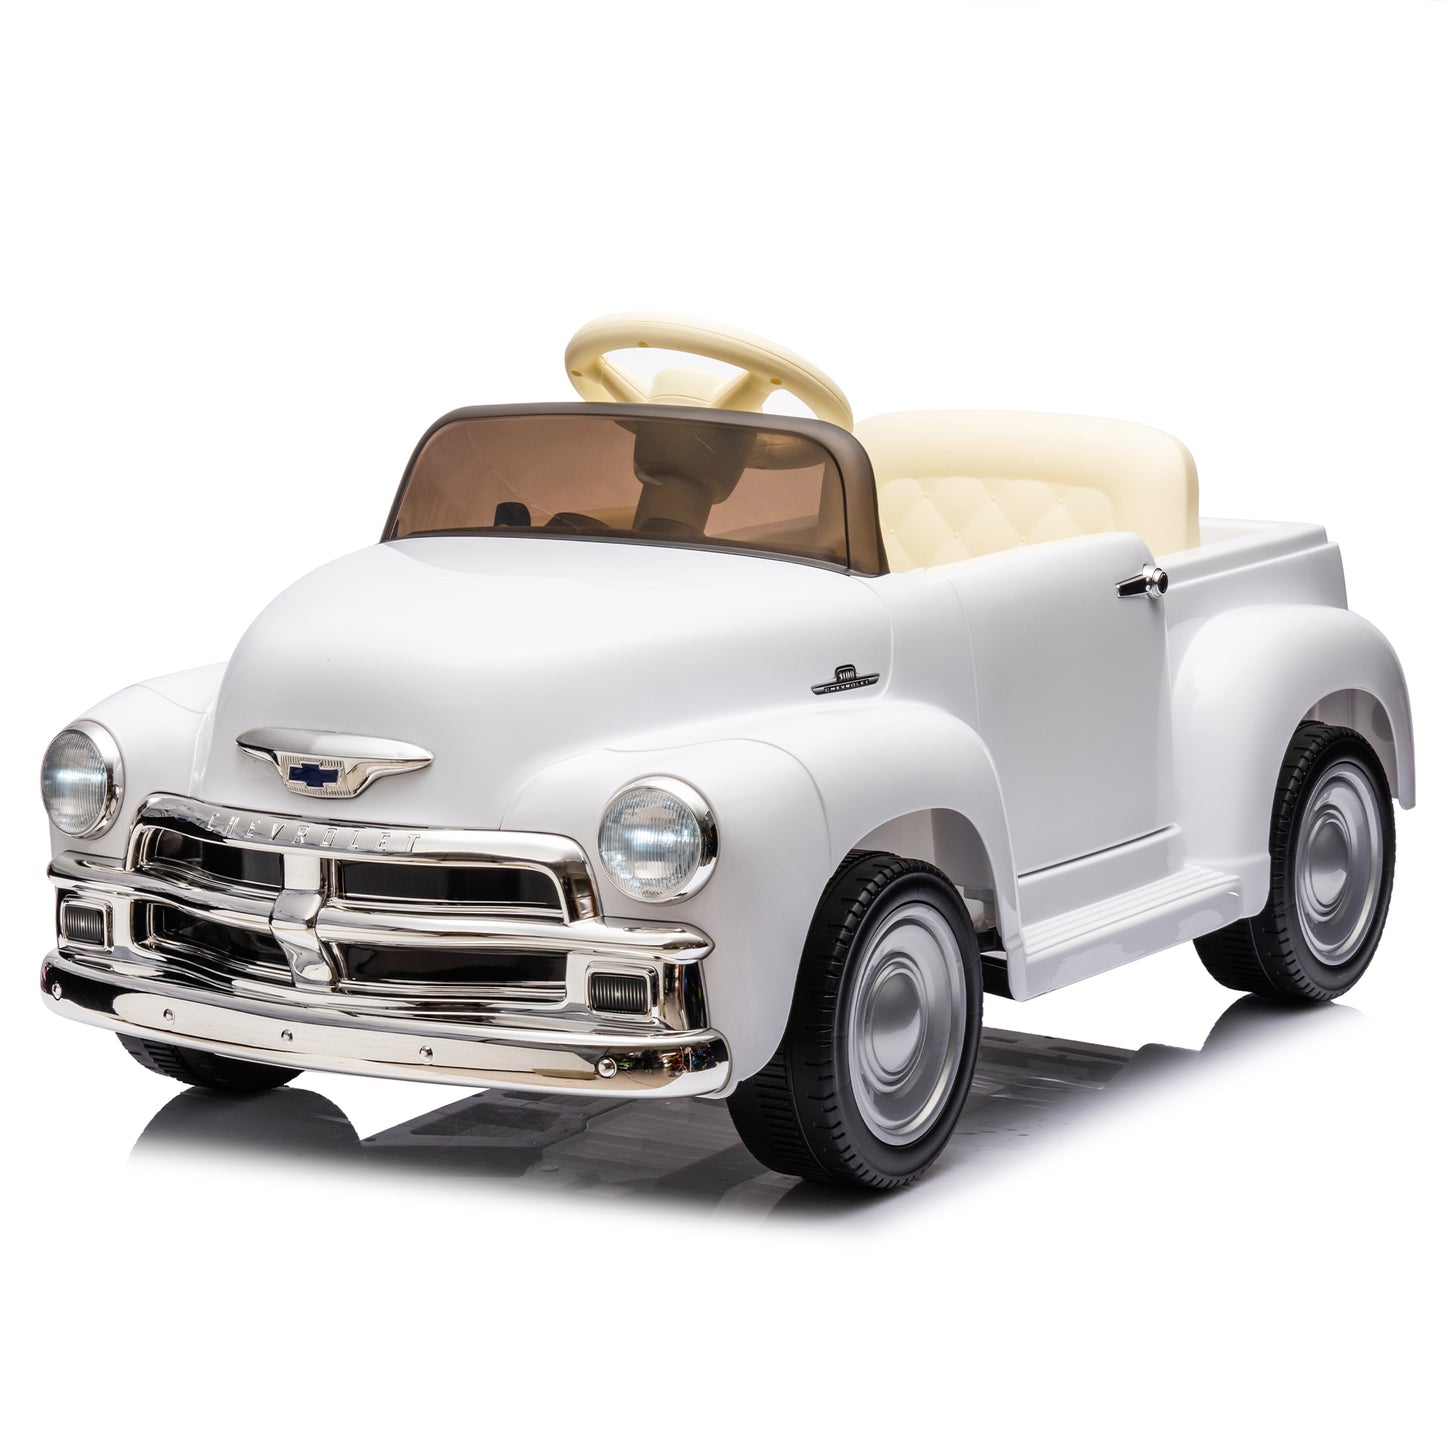 12V Kids Ride On truck car w/parents control, Licensed Chevrolet 3100 pickup,electric car for kid,Vintage modeling,3 speeds,LED Lights,Bluetooth,USB,High-power up to 3.11 MPH,age 3+